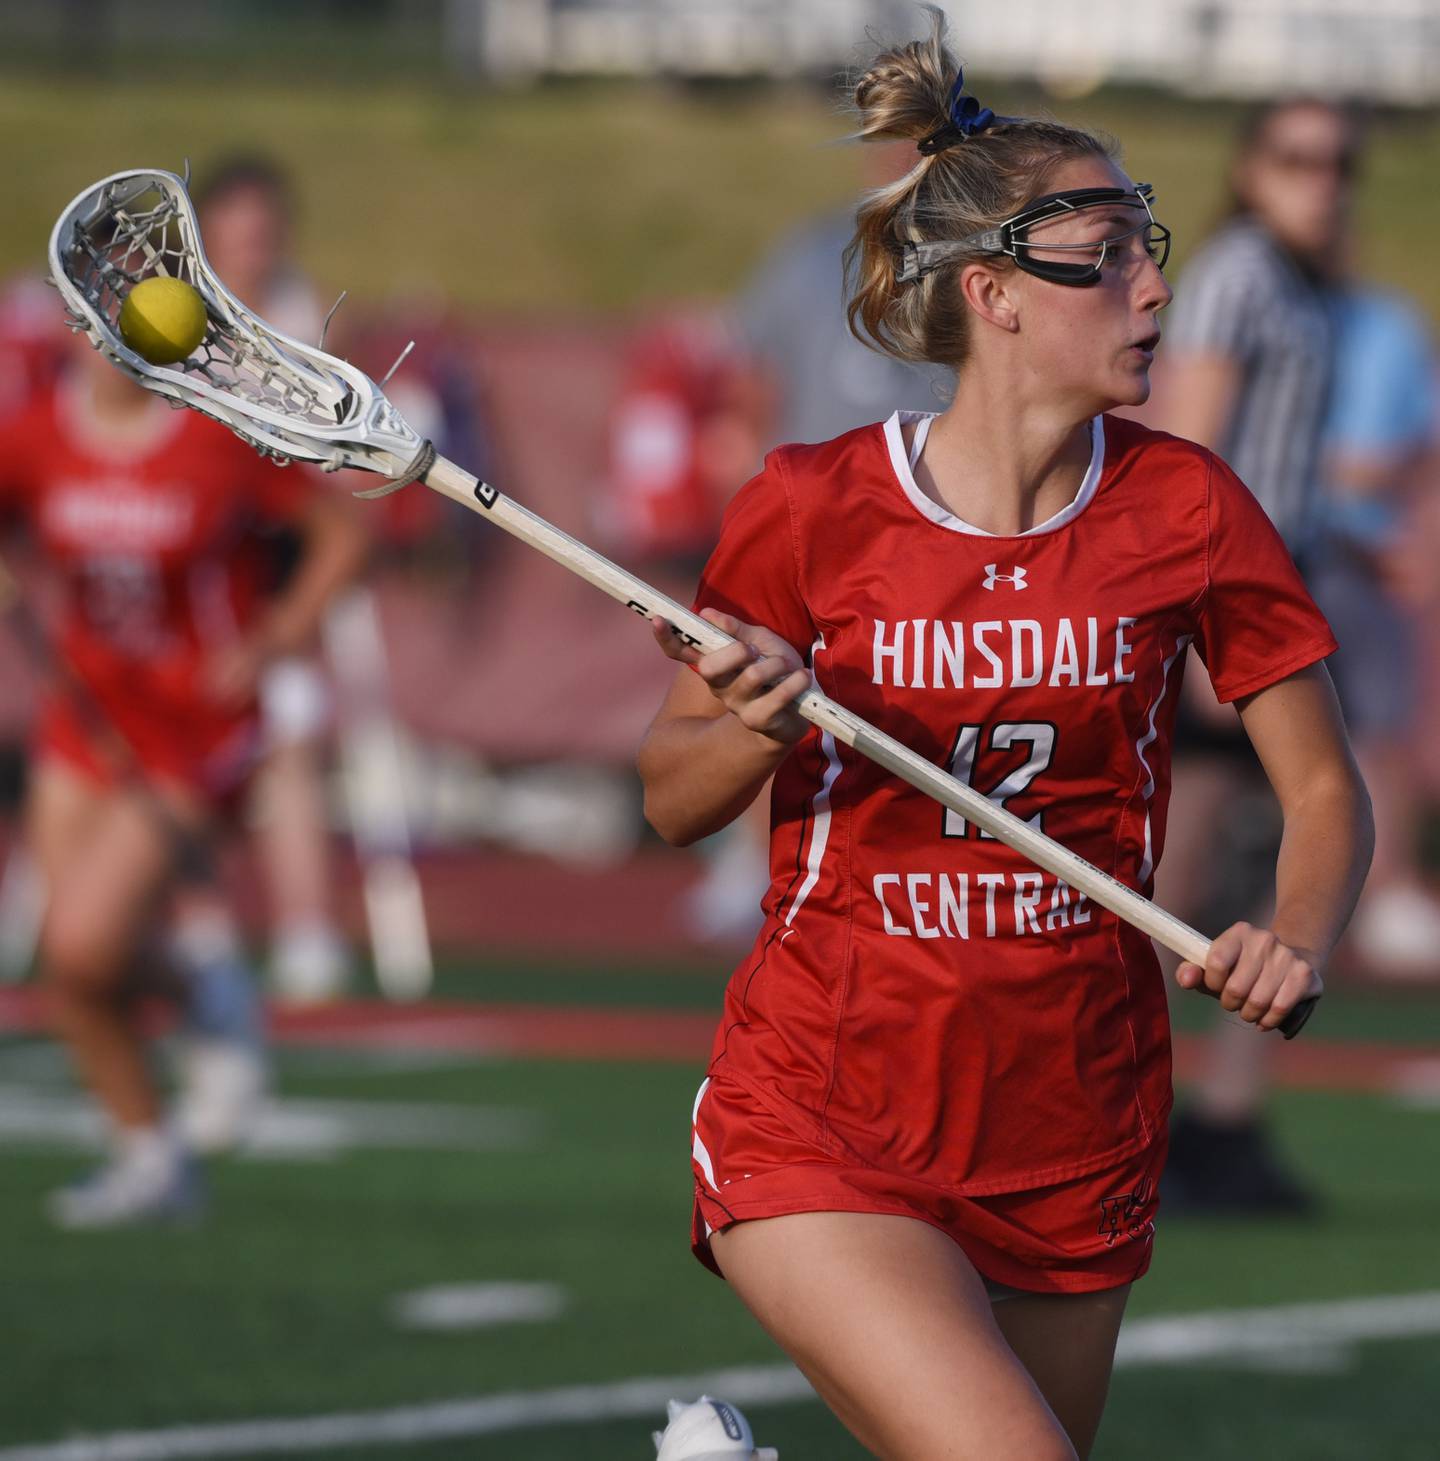 Joe Lewnard/jlewnard@dailyherald.com
Hinsdale Central’s Ari Tavoso carries the ball during the girls state lacrosse championship game against Loyola Academy in Hinsdale Saturday.